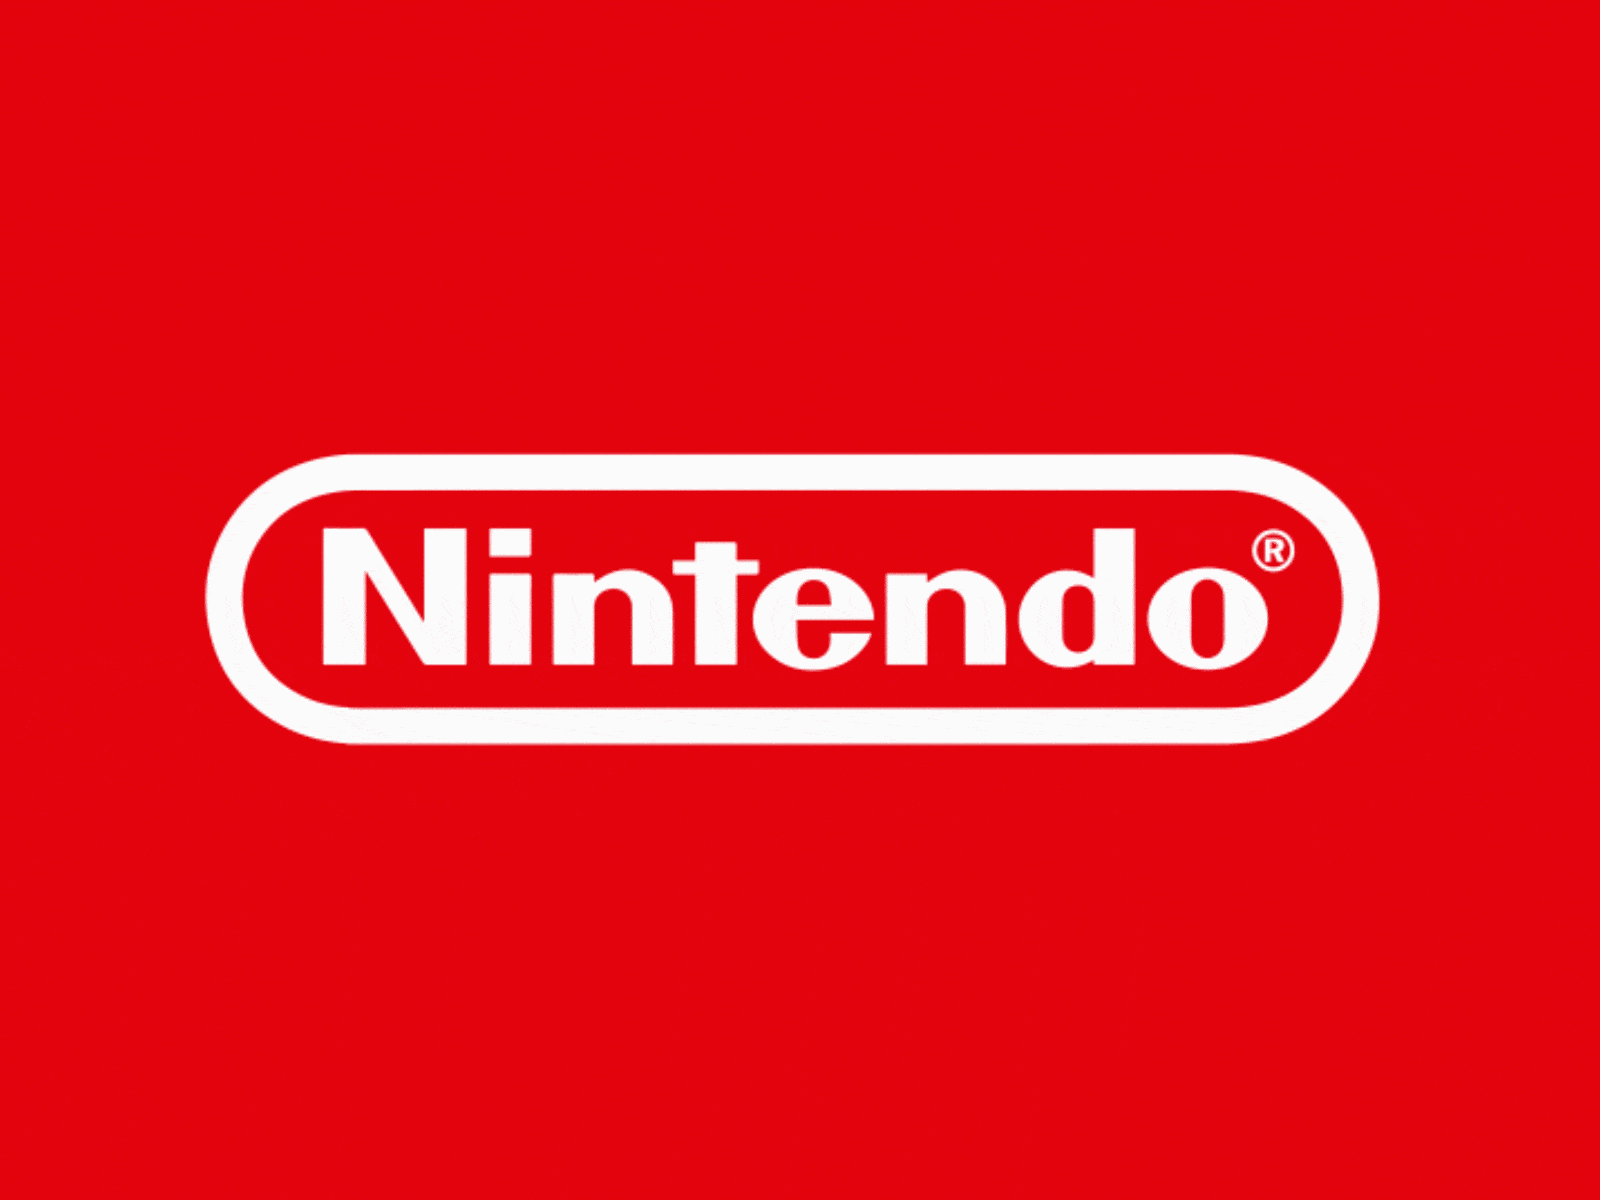 Nintendo Logo Redesign By Caique Oliveira On Dribbble